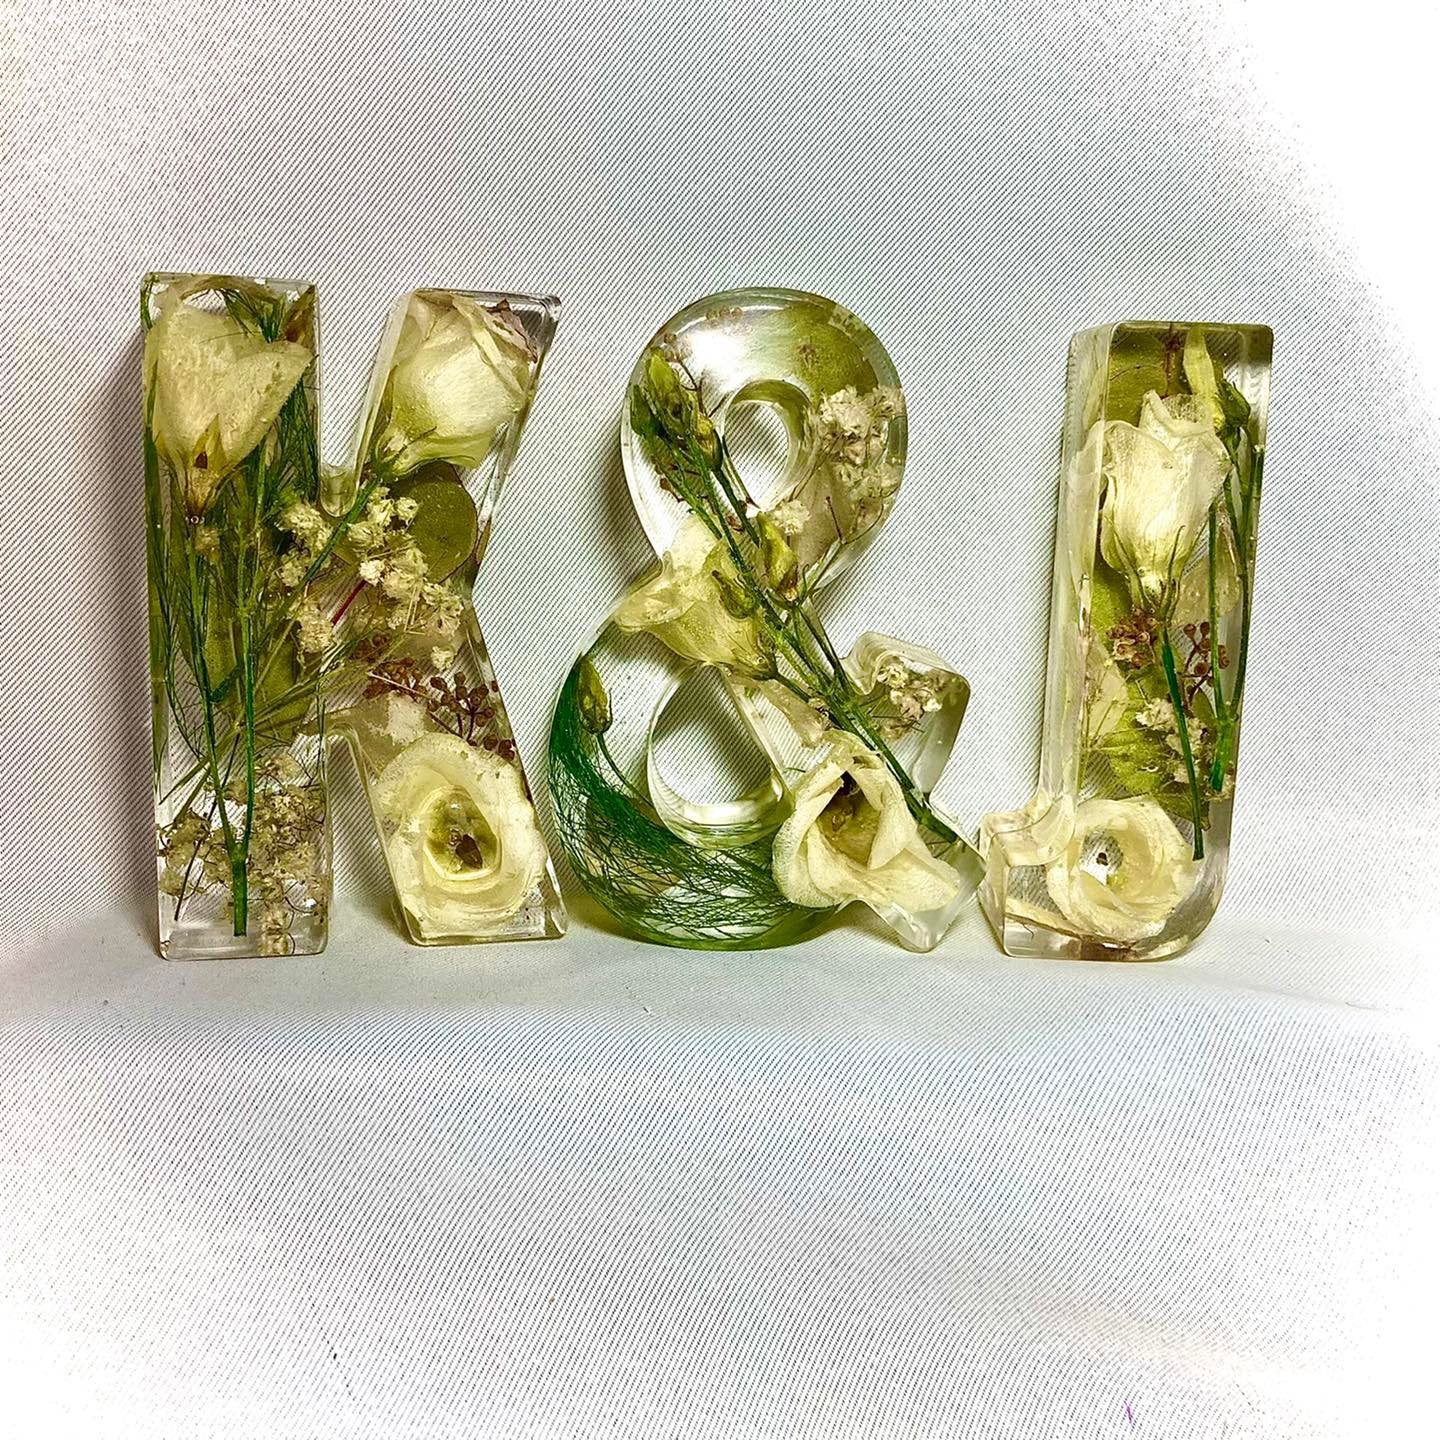 Flower Preservation two 11cm letters and an ampersand